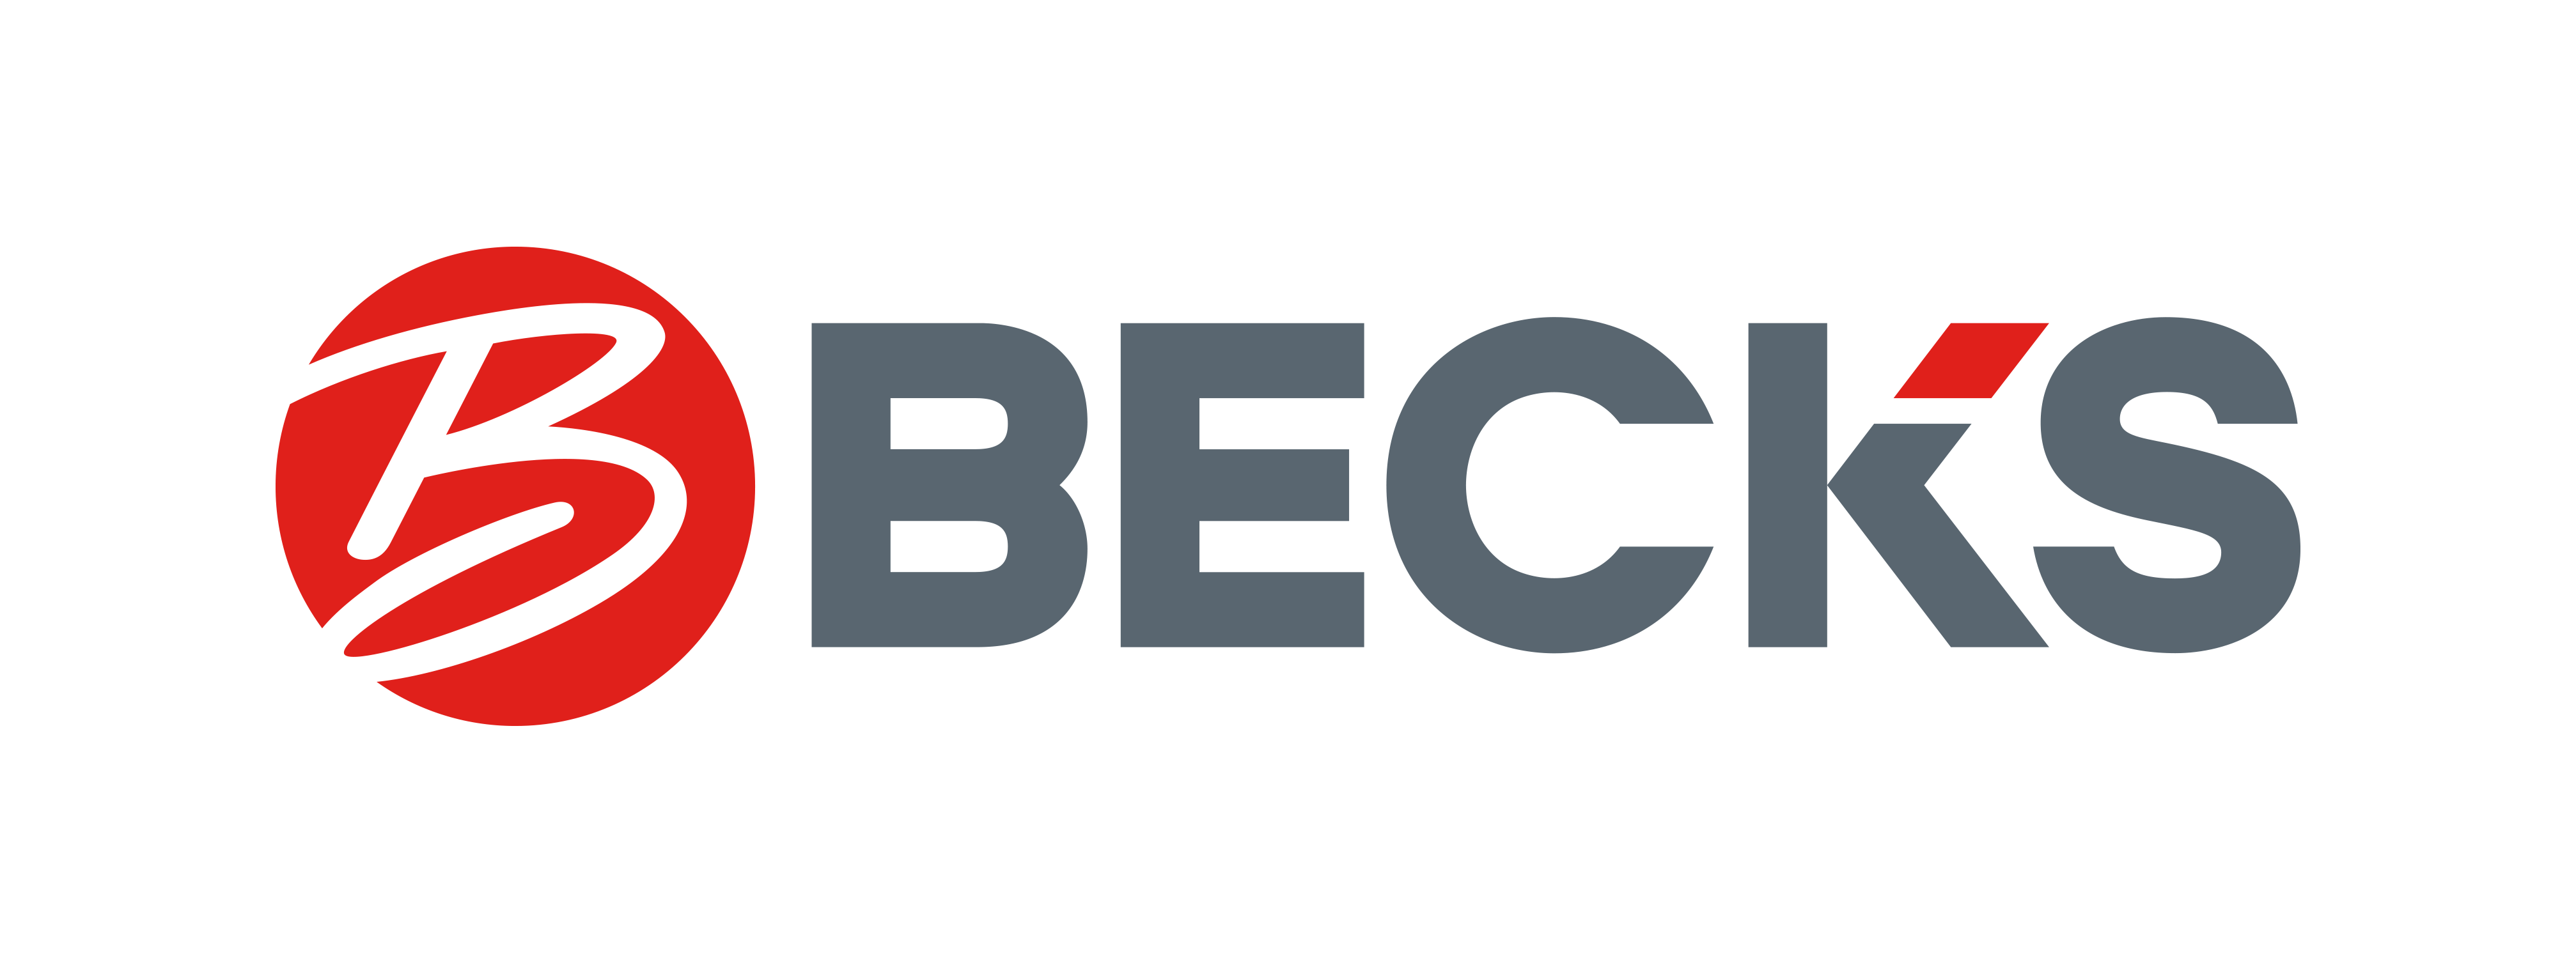 Beck’s Convenience Stores & Gas Stations Logo